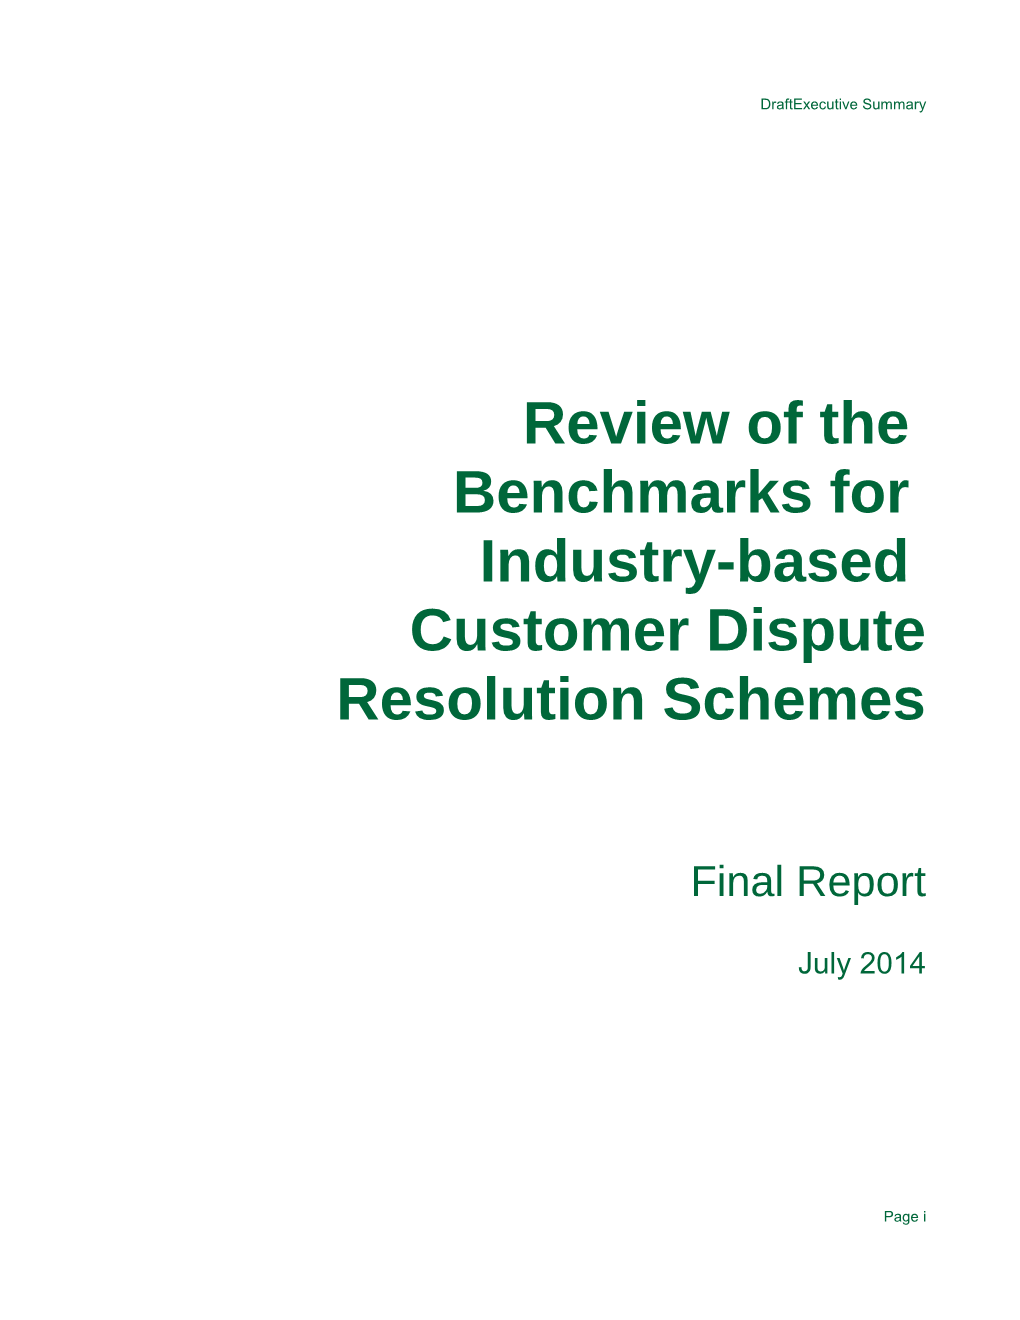 Review of the Benchmarks for Industry-Based Customer Dispute Resolution Schemes